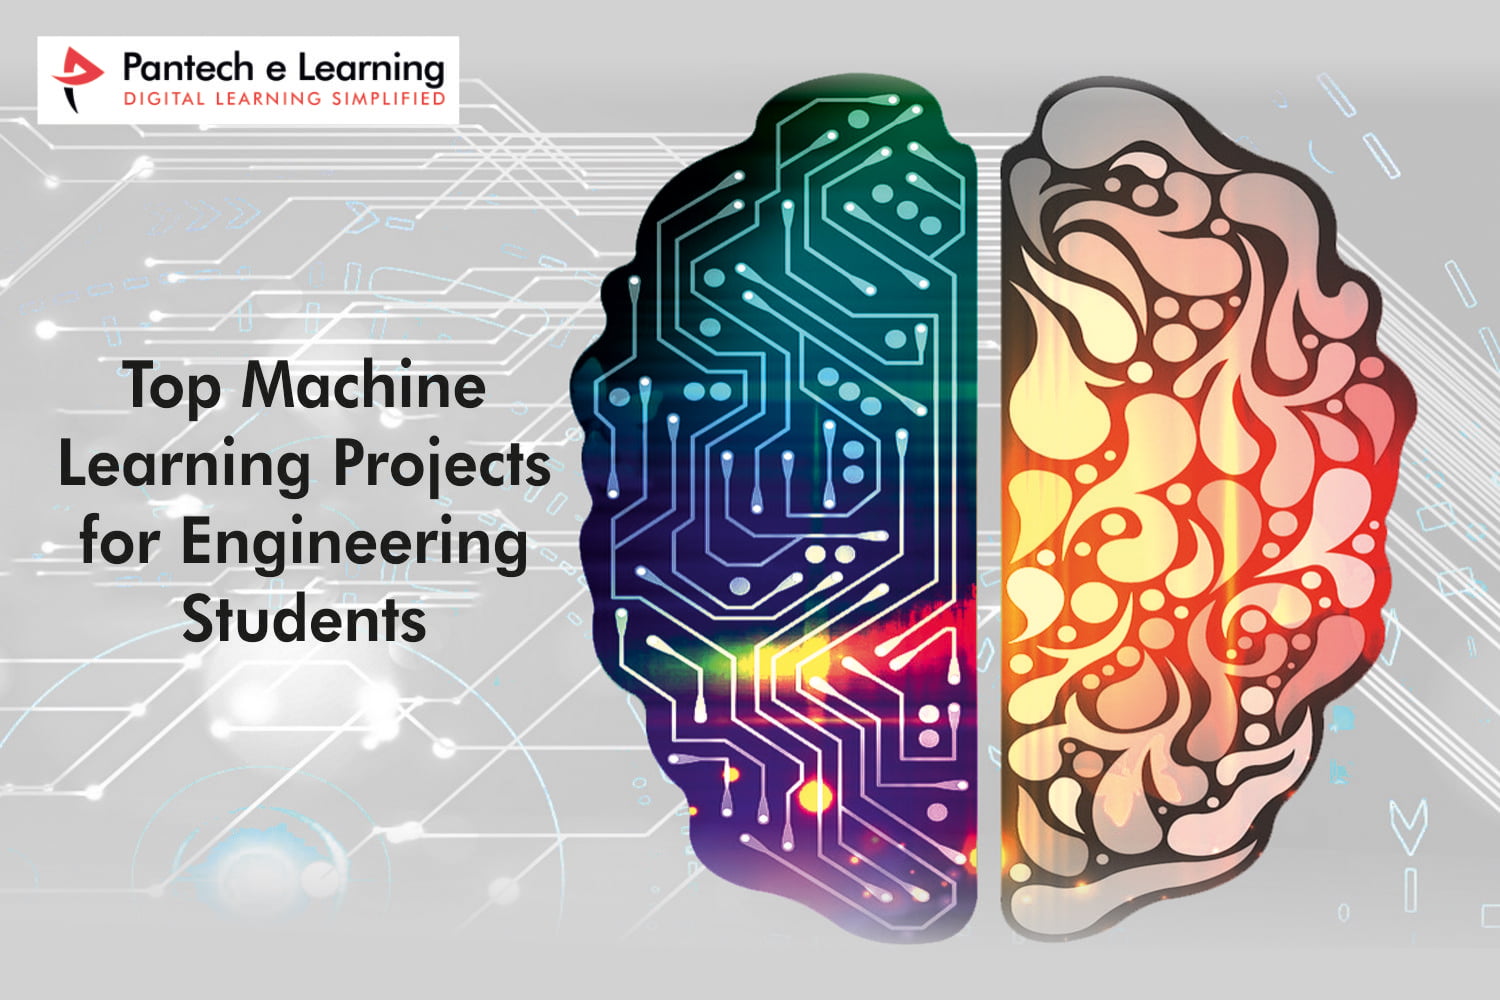 Top Machine Learning Projects for Engineering Students